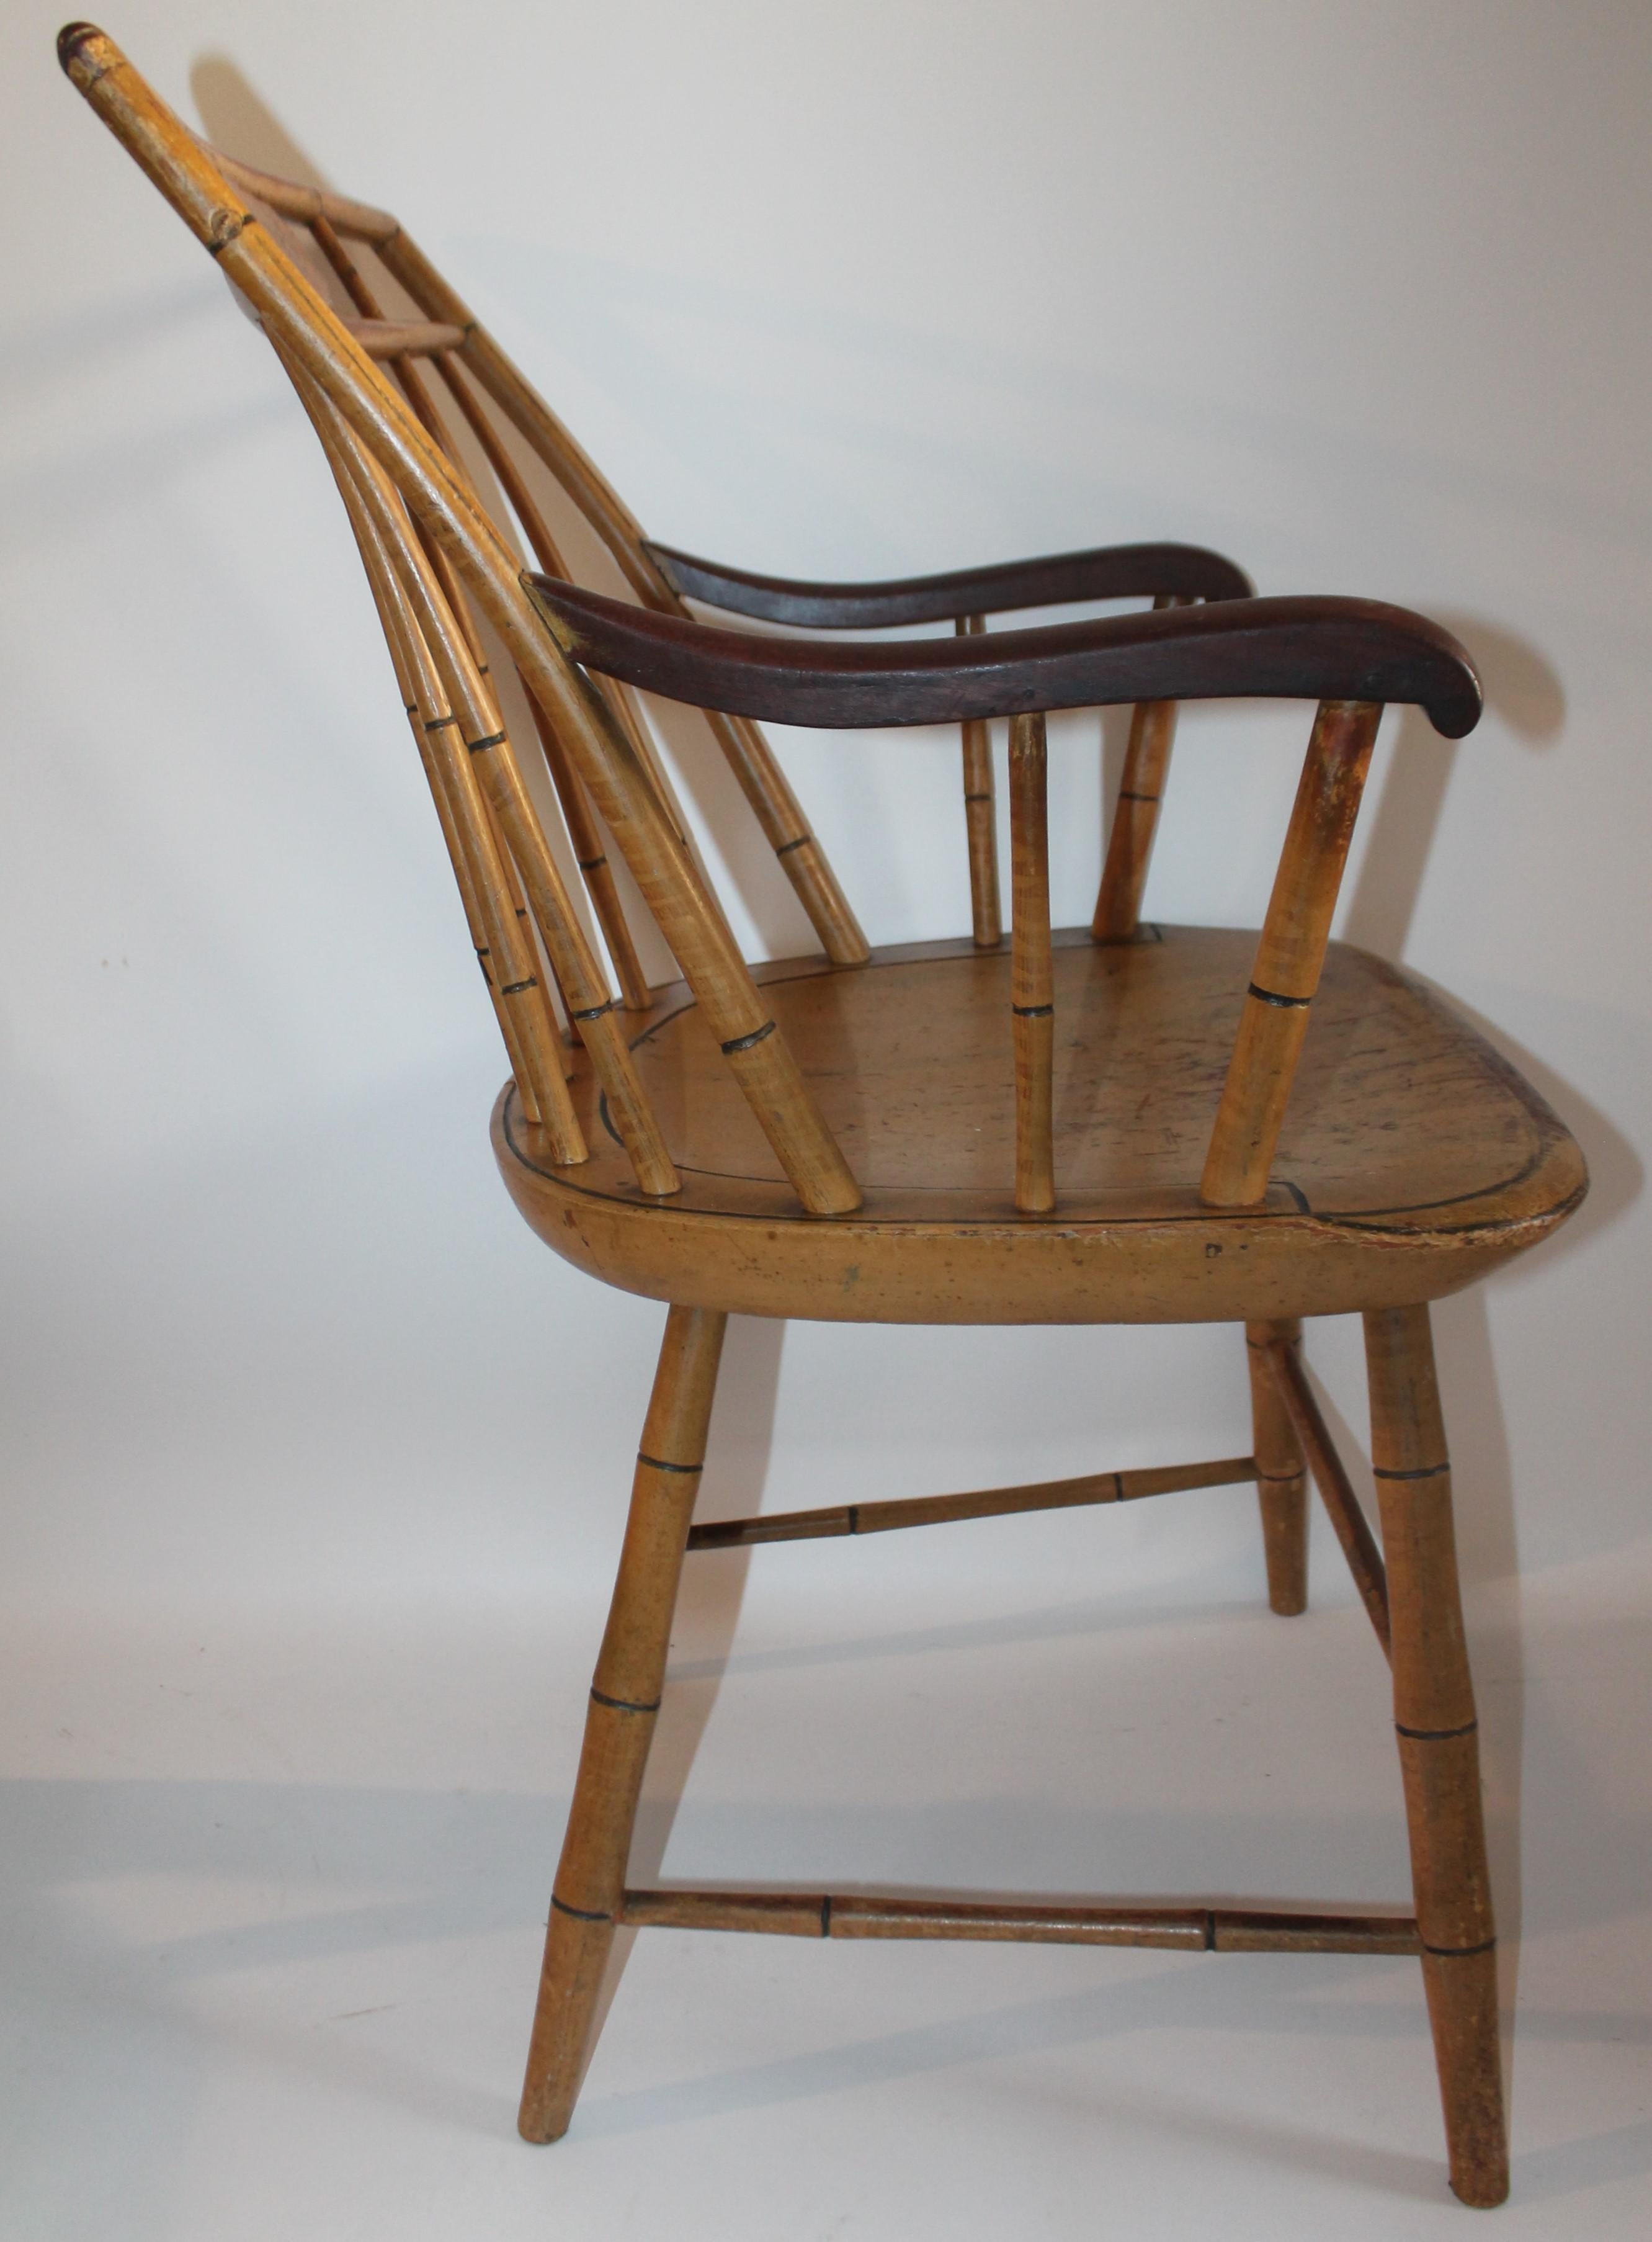 This amazing original mustard painted 19th century Windsor armchair has a wonderful undisturbed surface and in fine condition. The arms are all original as well and unpainted.